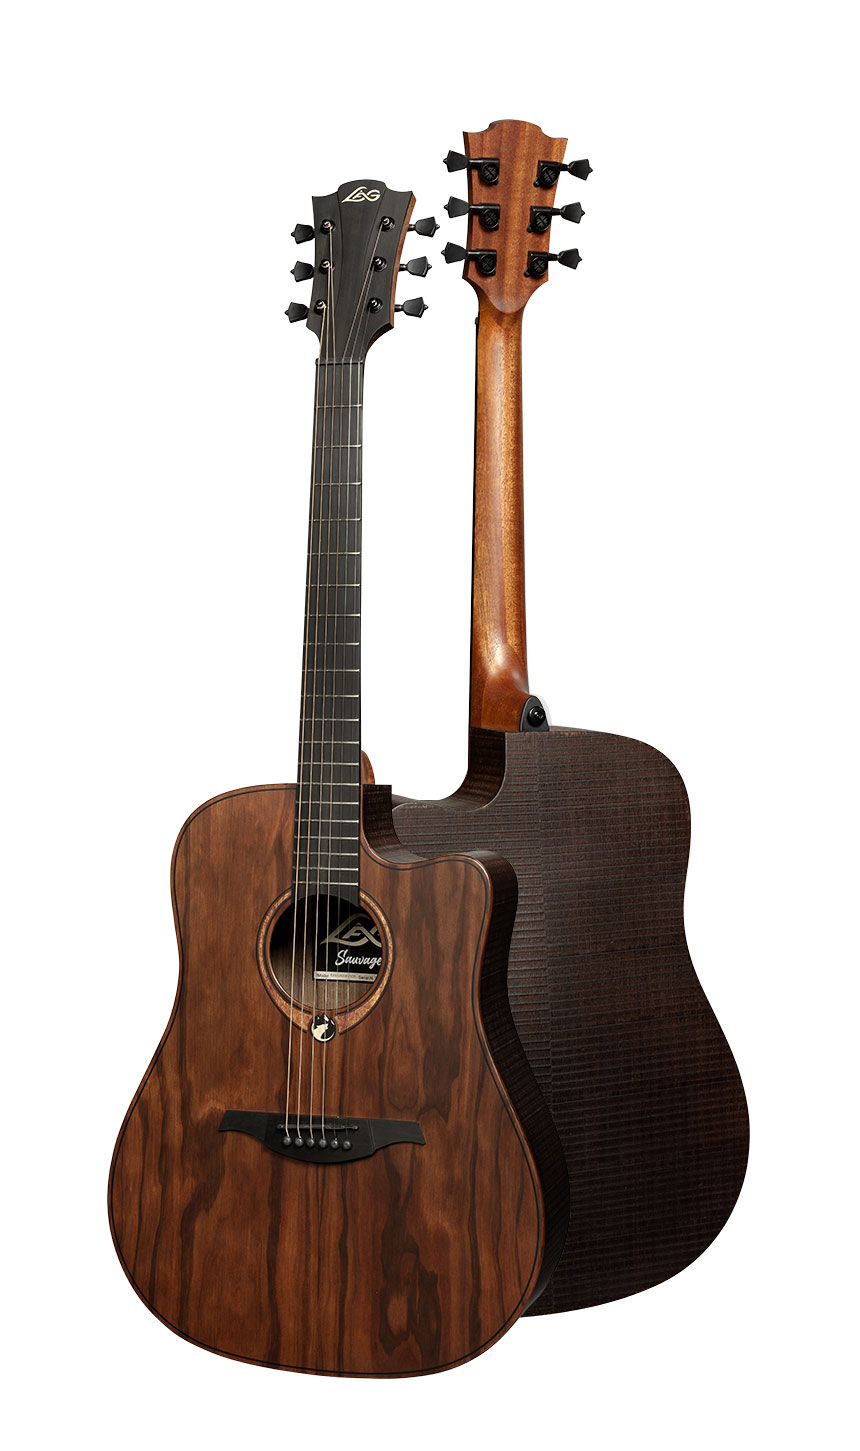 Lag-Sauvage-DCE-(DREADNOUGHT-CUTAWAY-ACOUSTIC-ELECTRIC)_04_133616.jpg